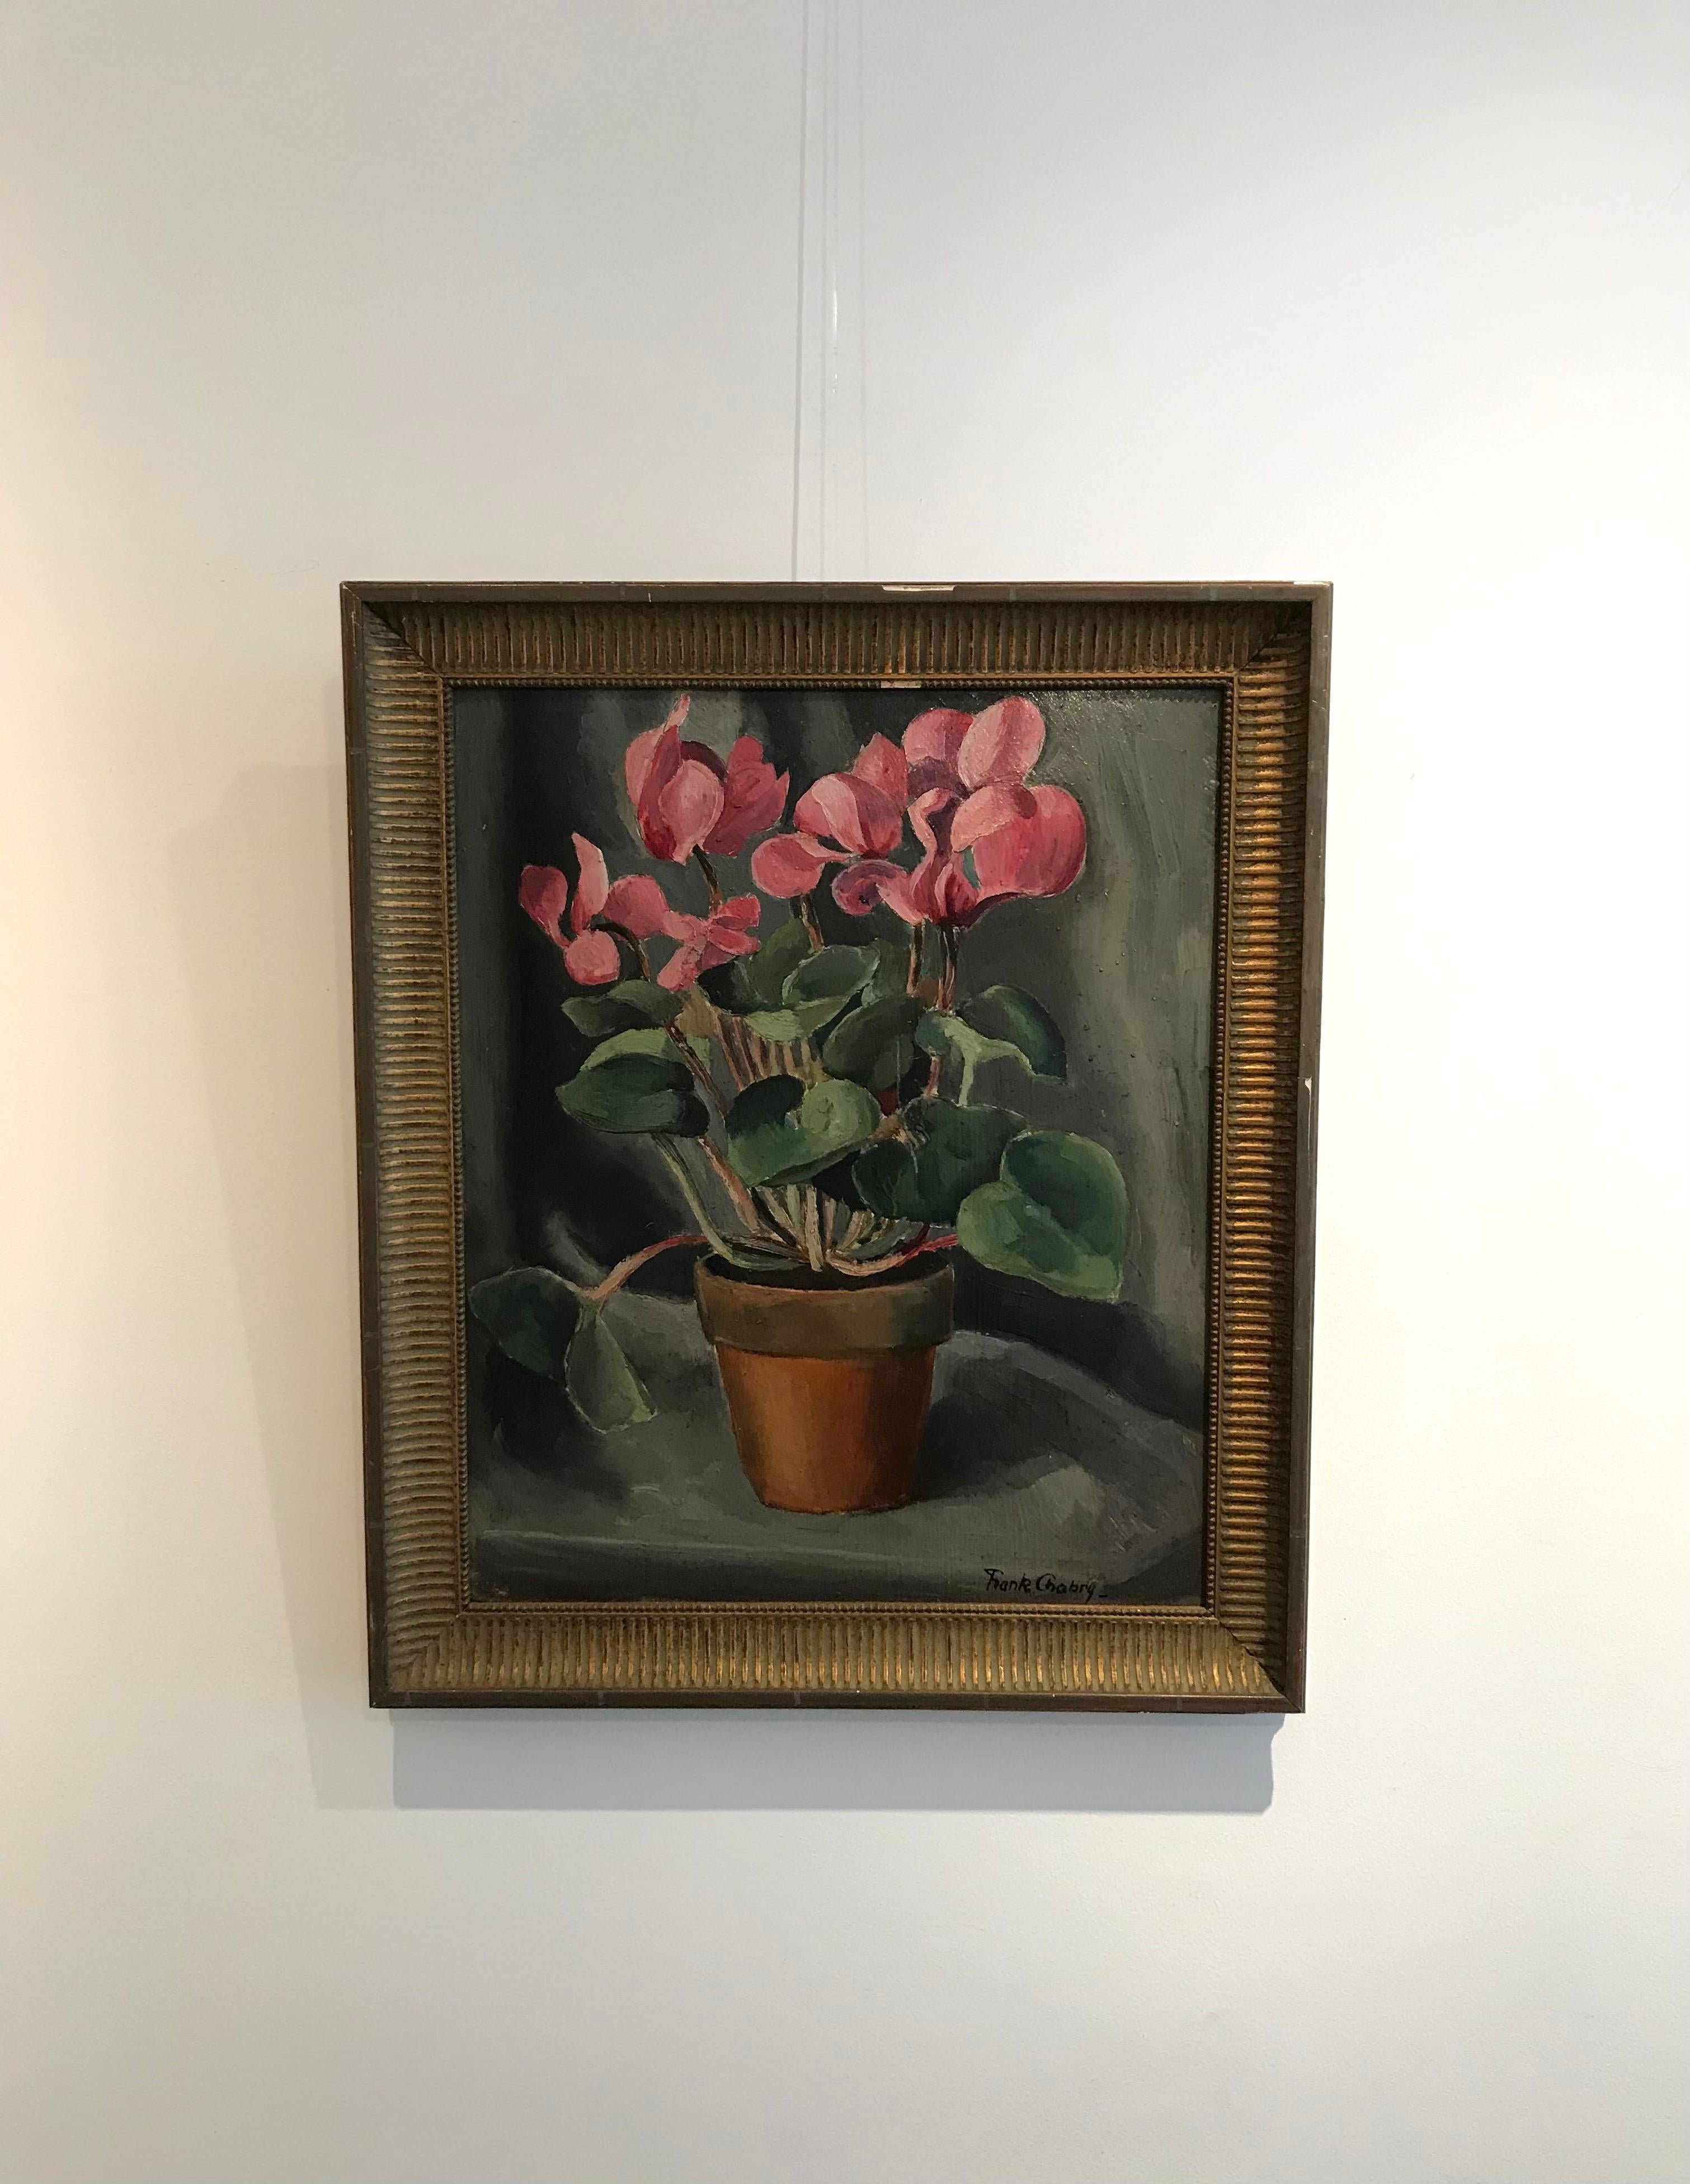 Potted flowers - Painting by Frank Chabry